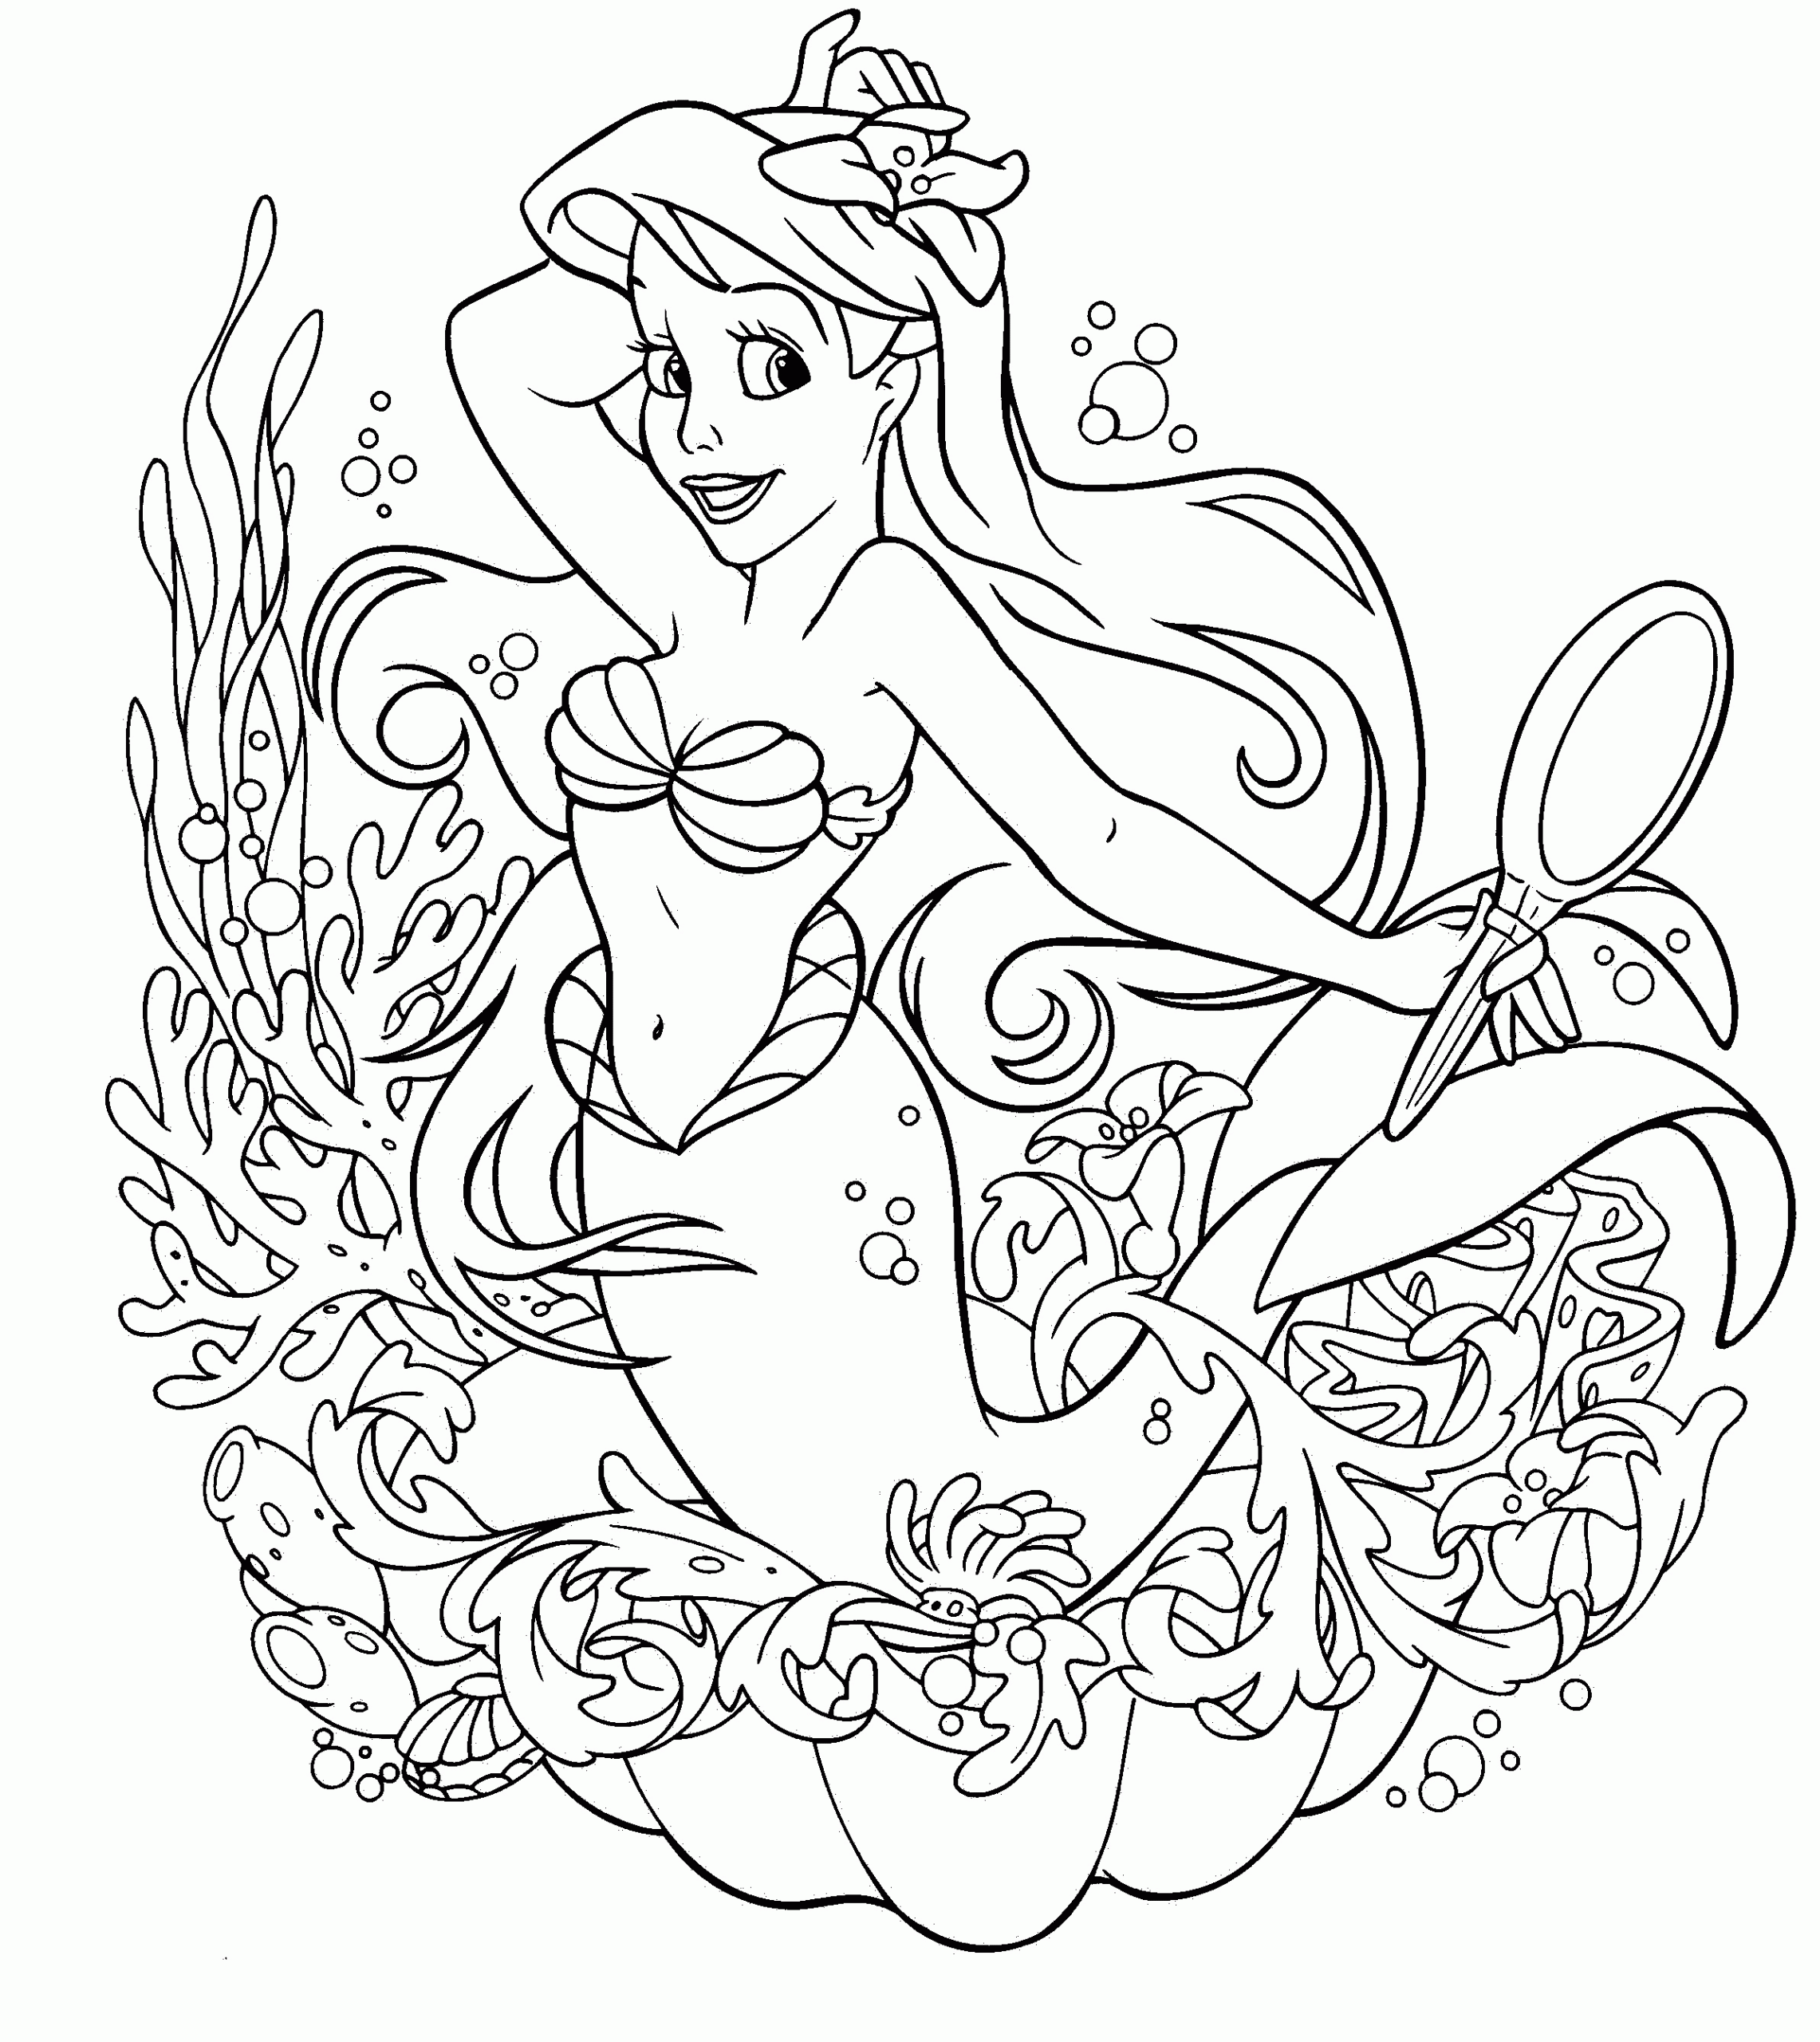 Coloring Pages Disney For Girls
 princess coloring pages for girls